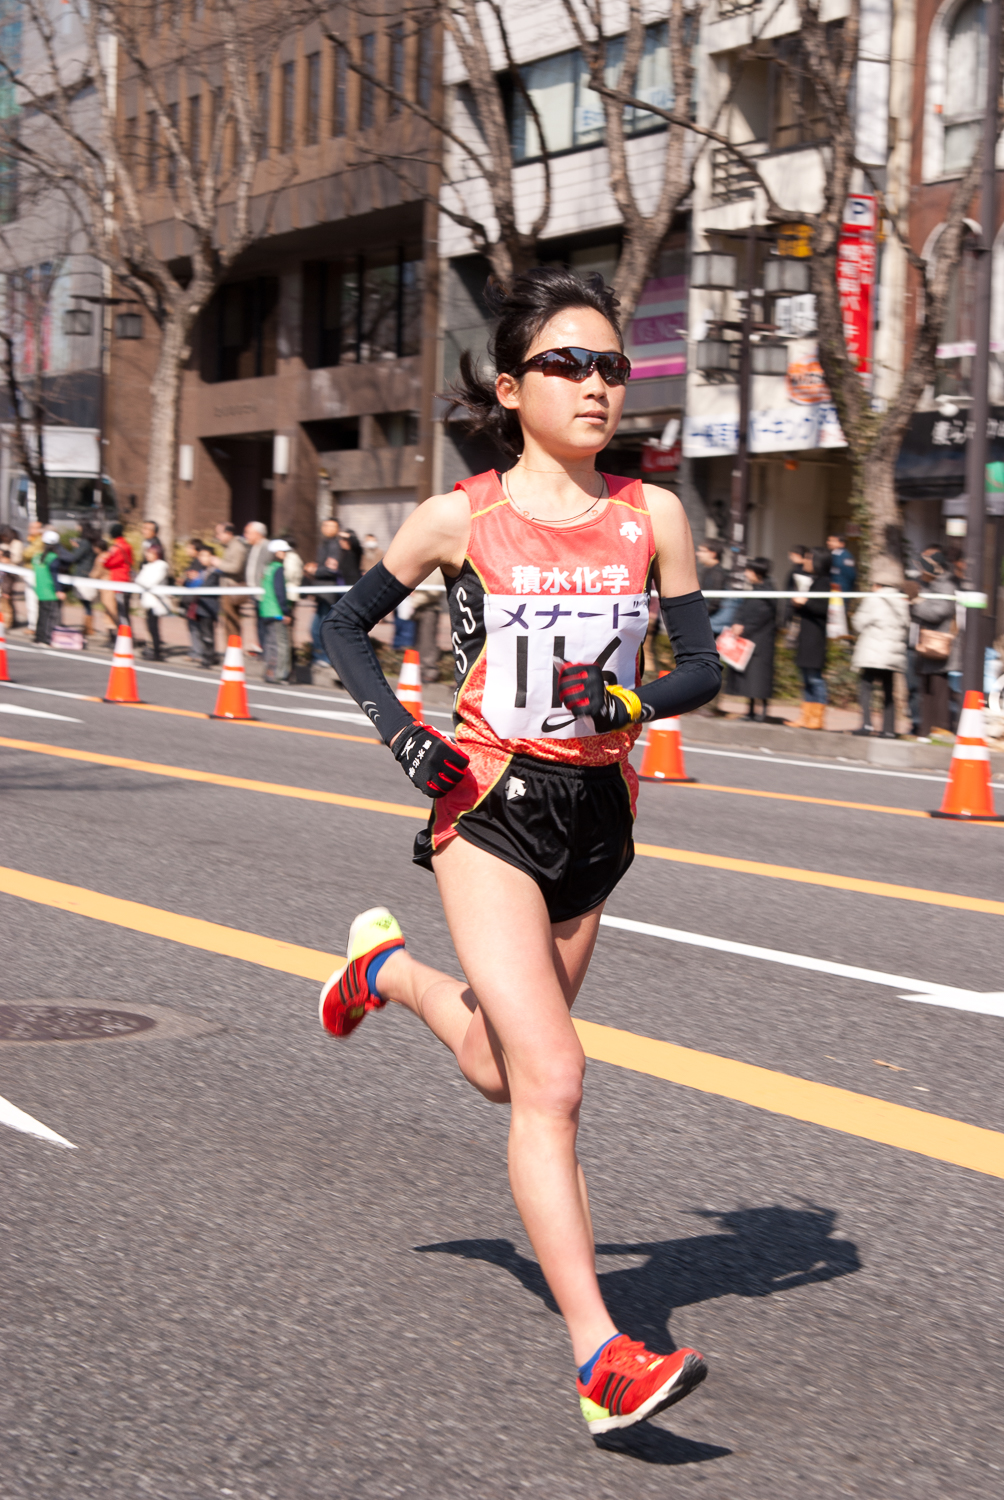 One of Japan's top female marathon runners competing